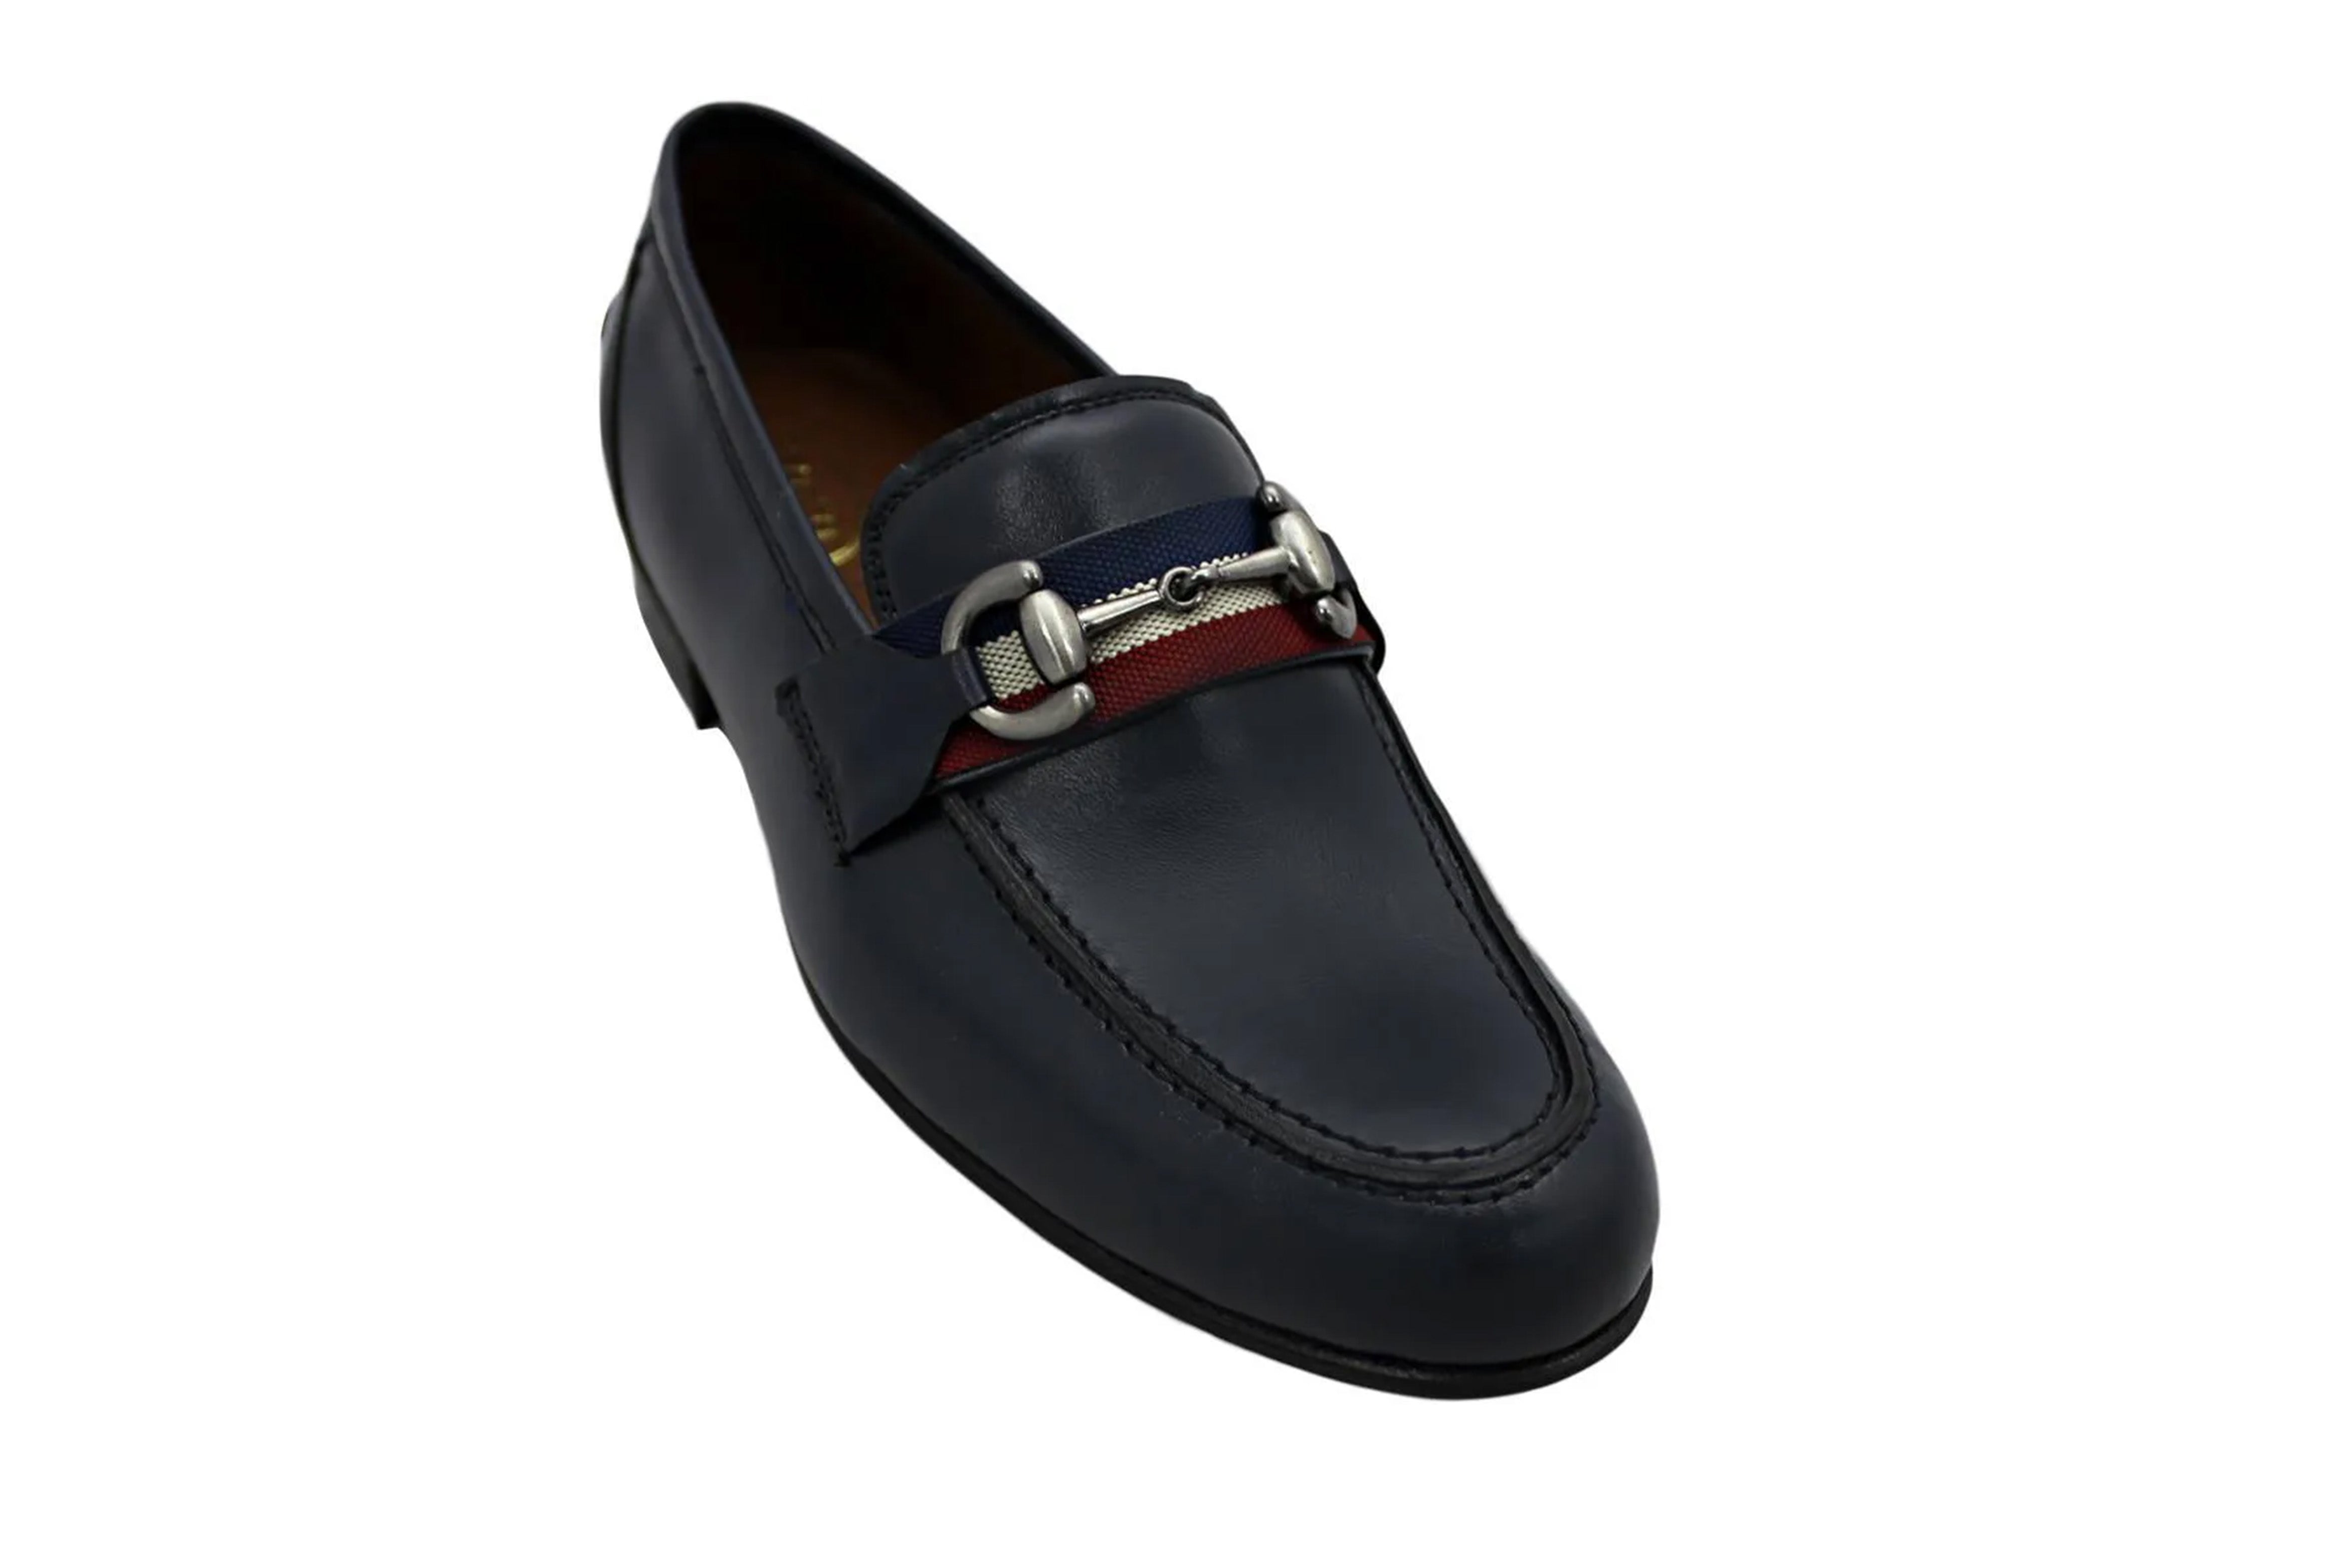 Italian style loafers - Fiore navy blue